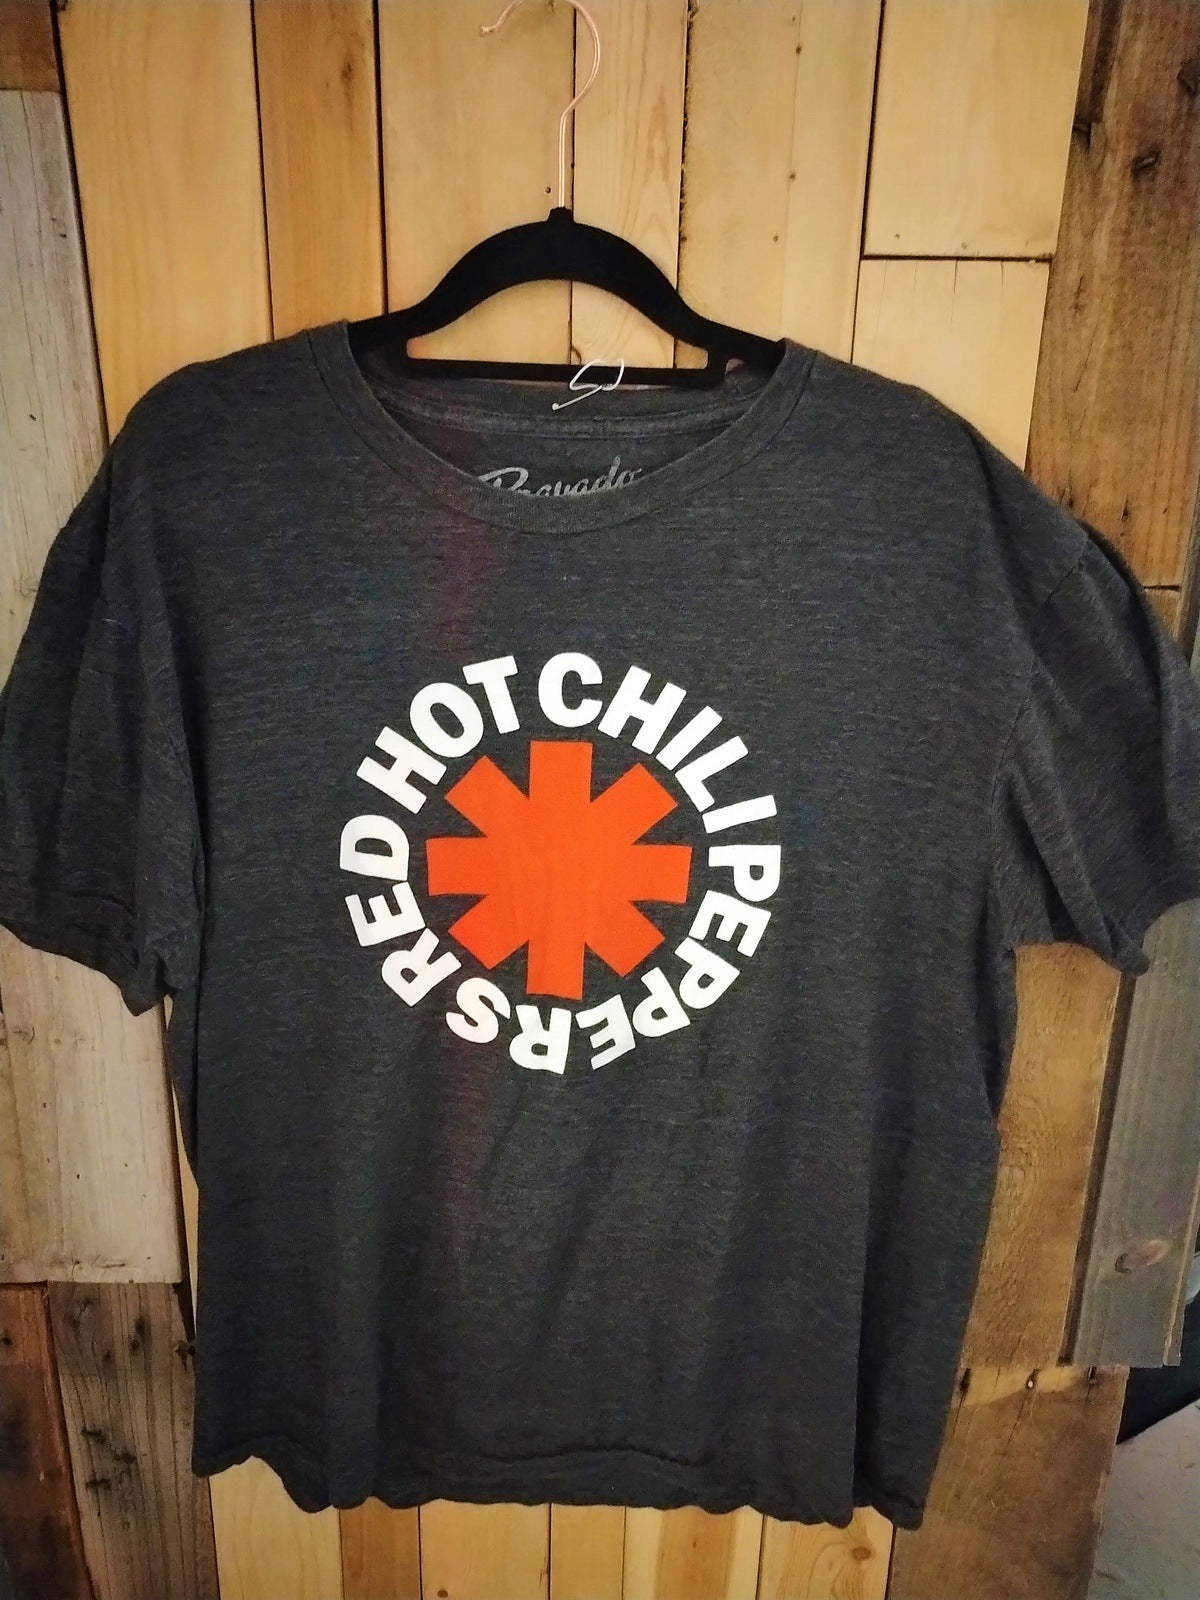 Red Hot Chili Peppers T Shirt Size Large by Bravado